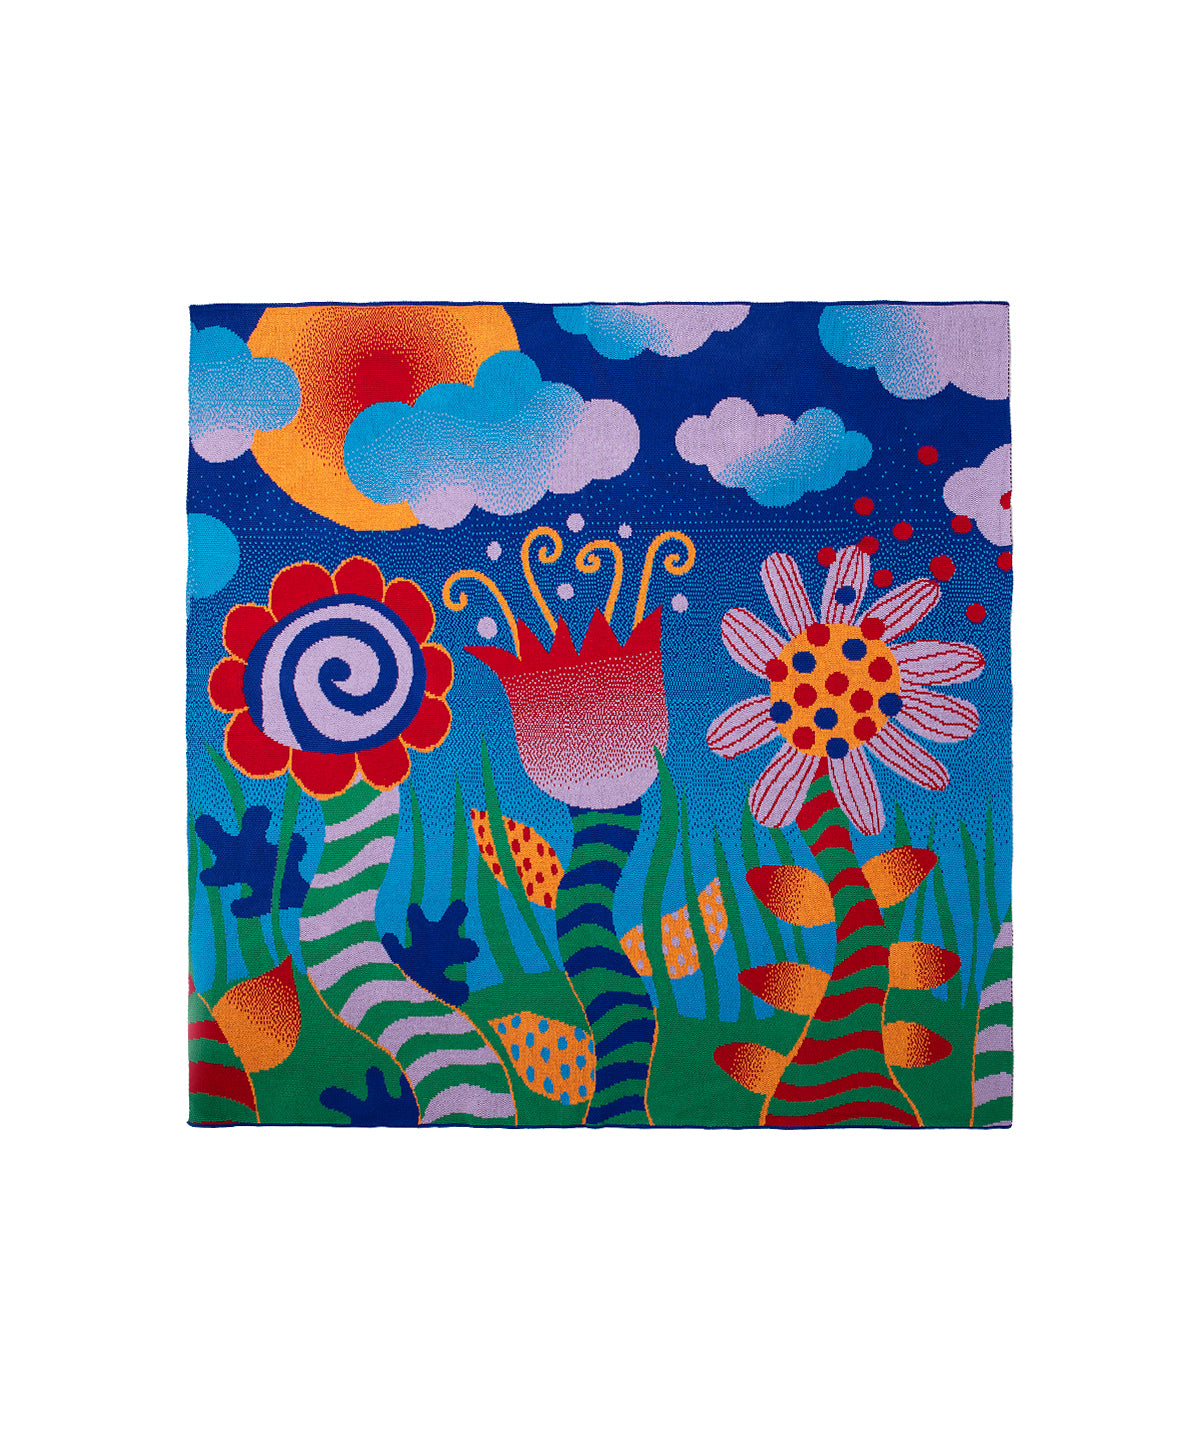 Image of Best Buds Blanket showing 3 flowers coming from bottom of the blanket with striped stems on a blue gradient background. Above the colorful flowers are blue clouds surrounding a red and orange sun sitting in the top left corner. Knit Blanket that is 60" by 60"